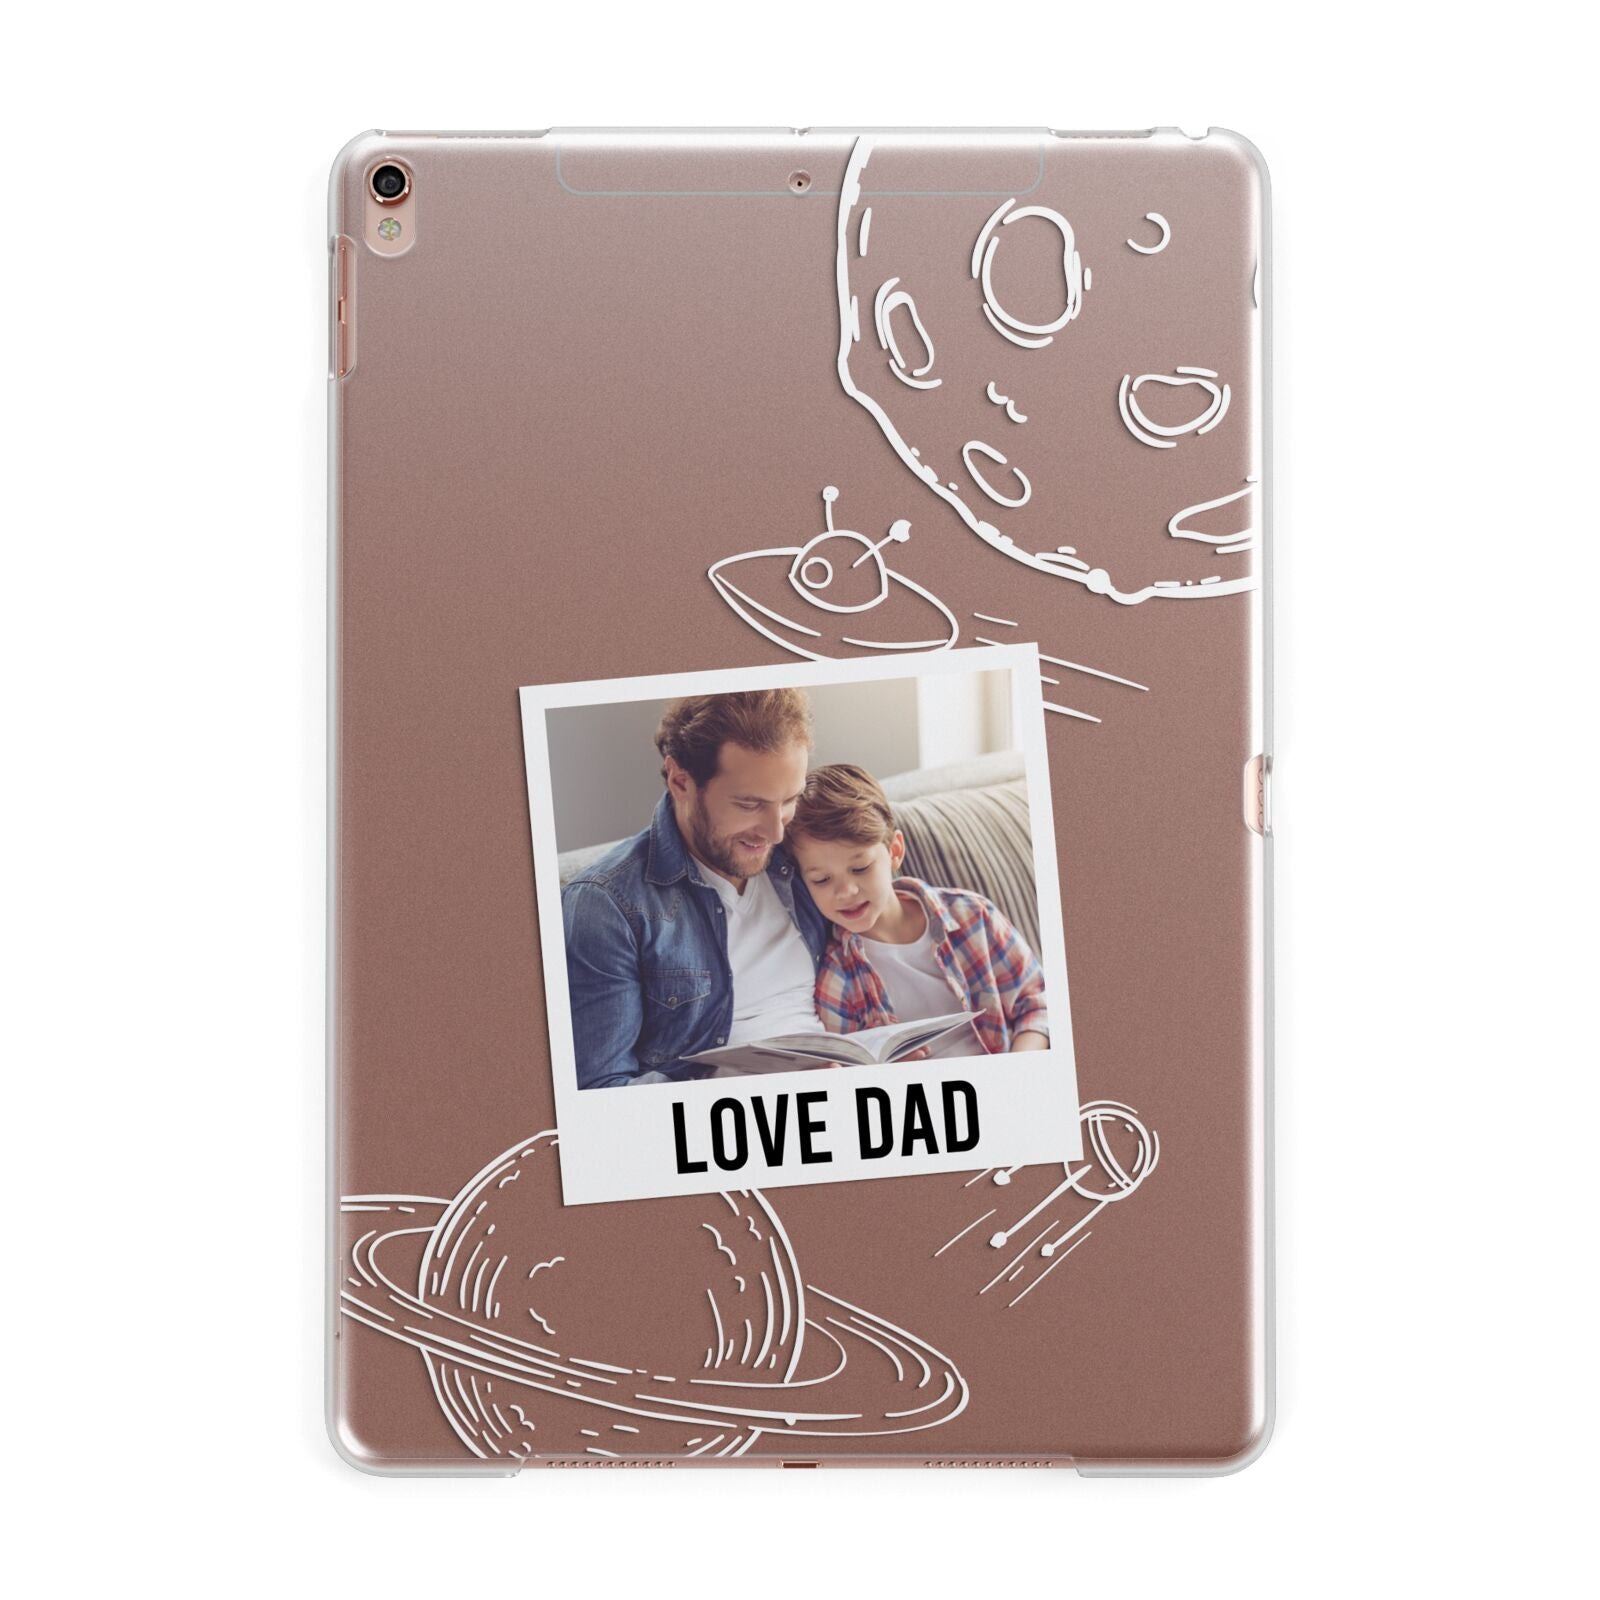 Personalised From Dad Photo Apple iPad Rose Gold Case